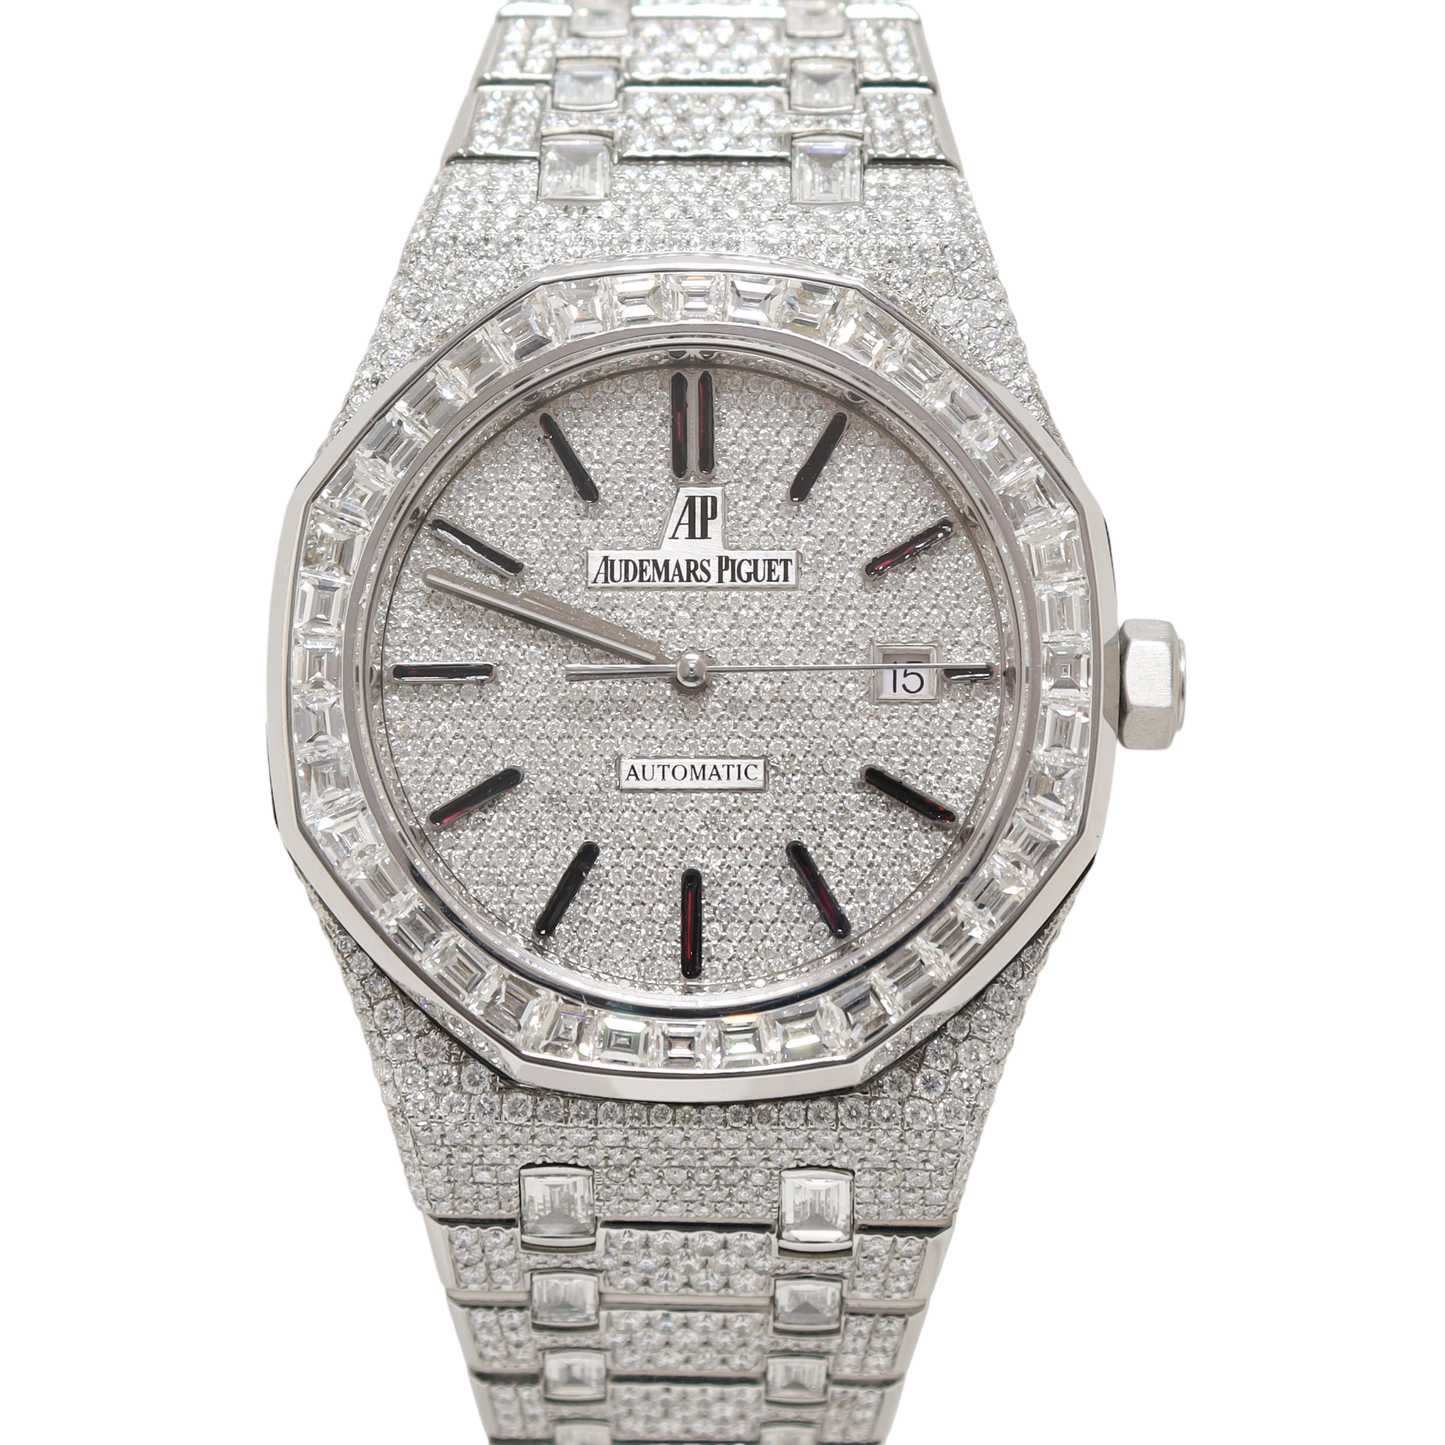 Load image into Gallery viewer, Audemars Piguet Royal Oak Stainless Steel 42mm Iced Out Pave Diamond Dial Watch Reference#: 26591TI.OO.1252TI.03 - Happy Jewelers Fine Jewelry Lifetime Warranty
